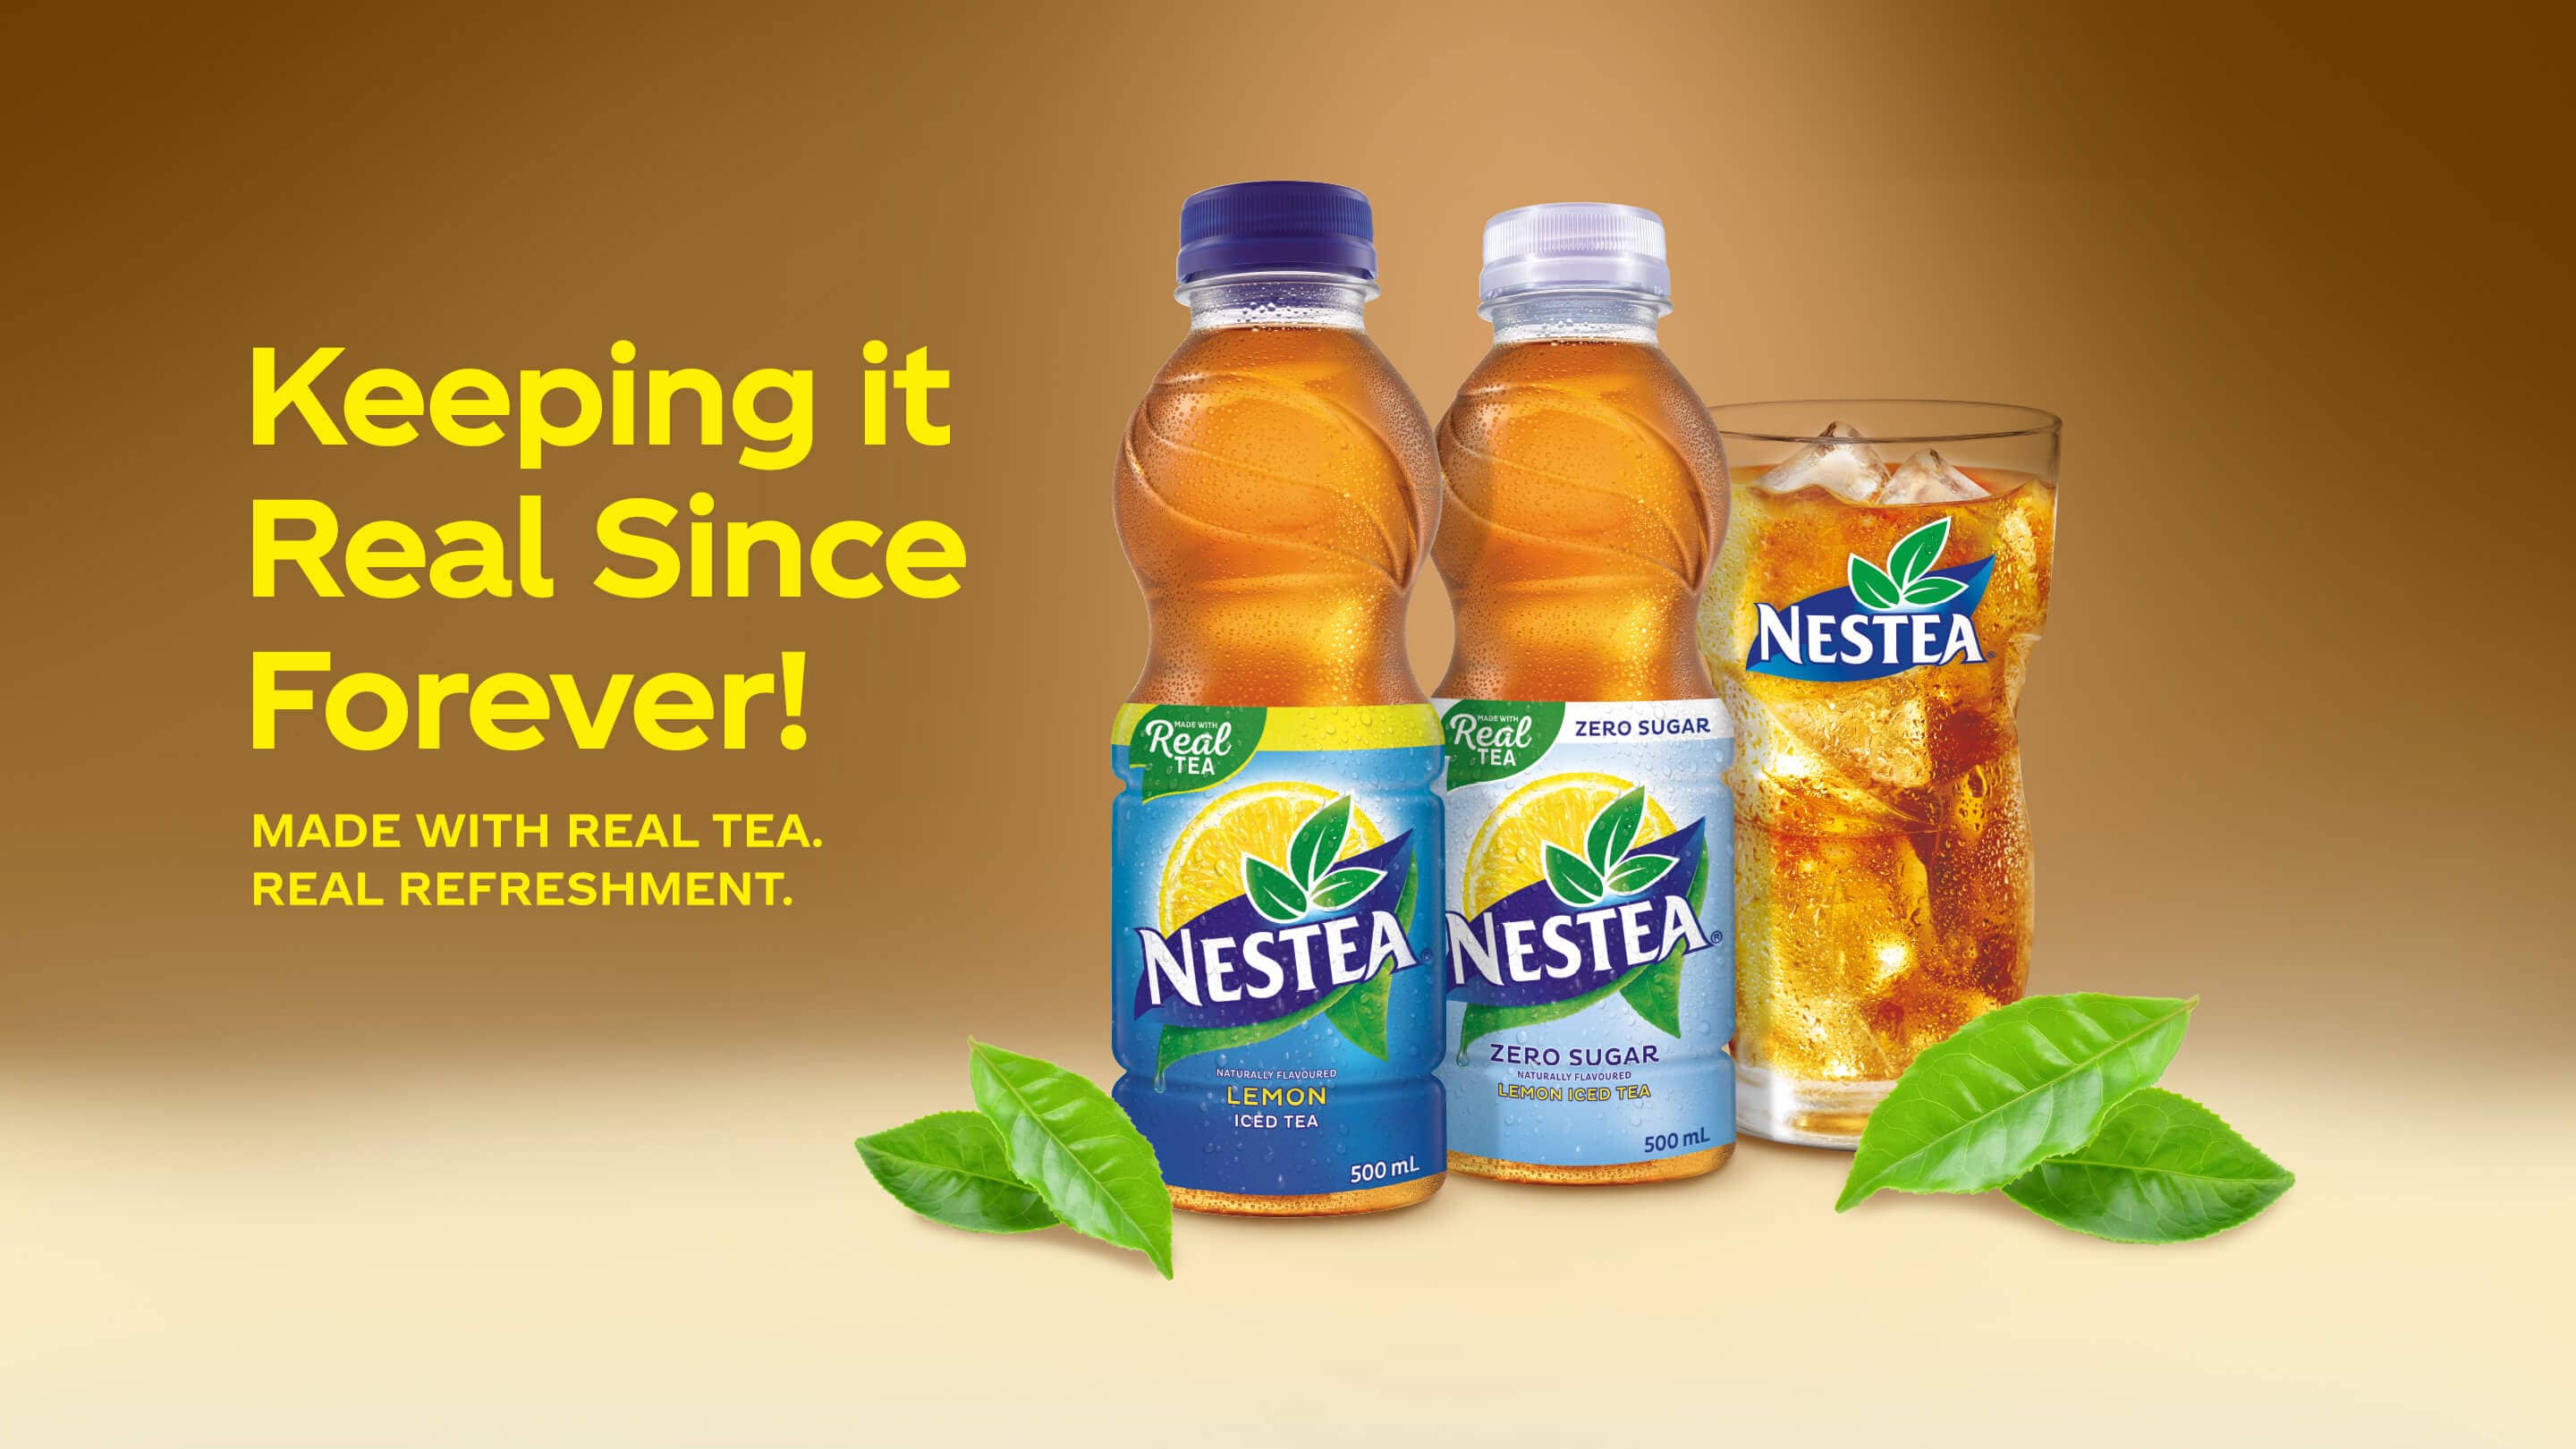 Nestea. Made with real tea. Real refreshment.